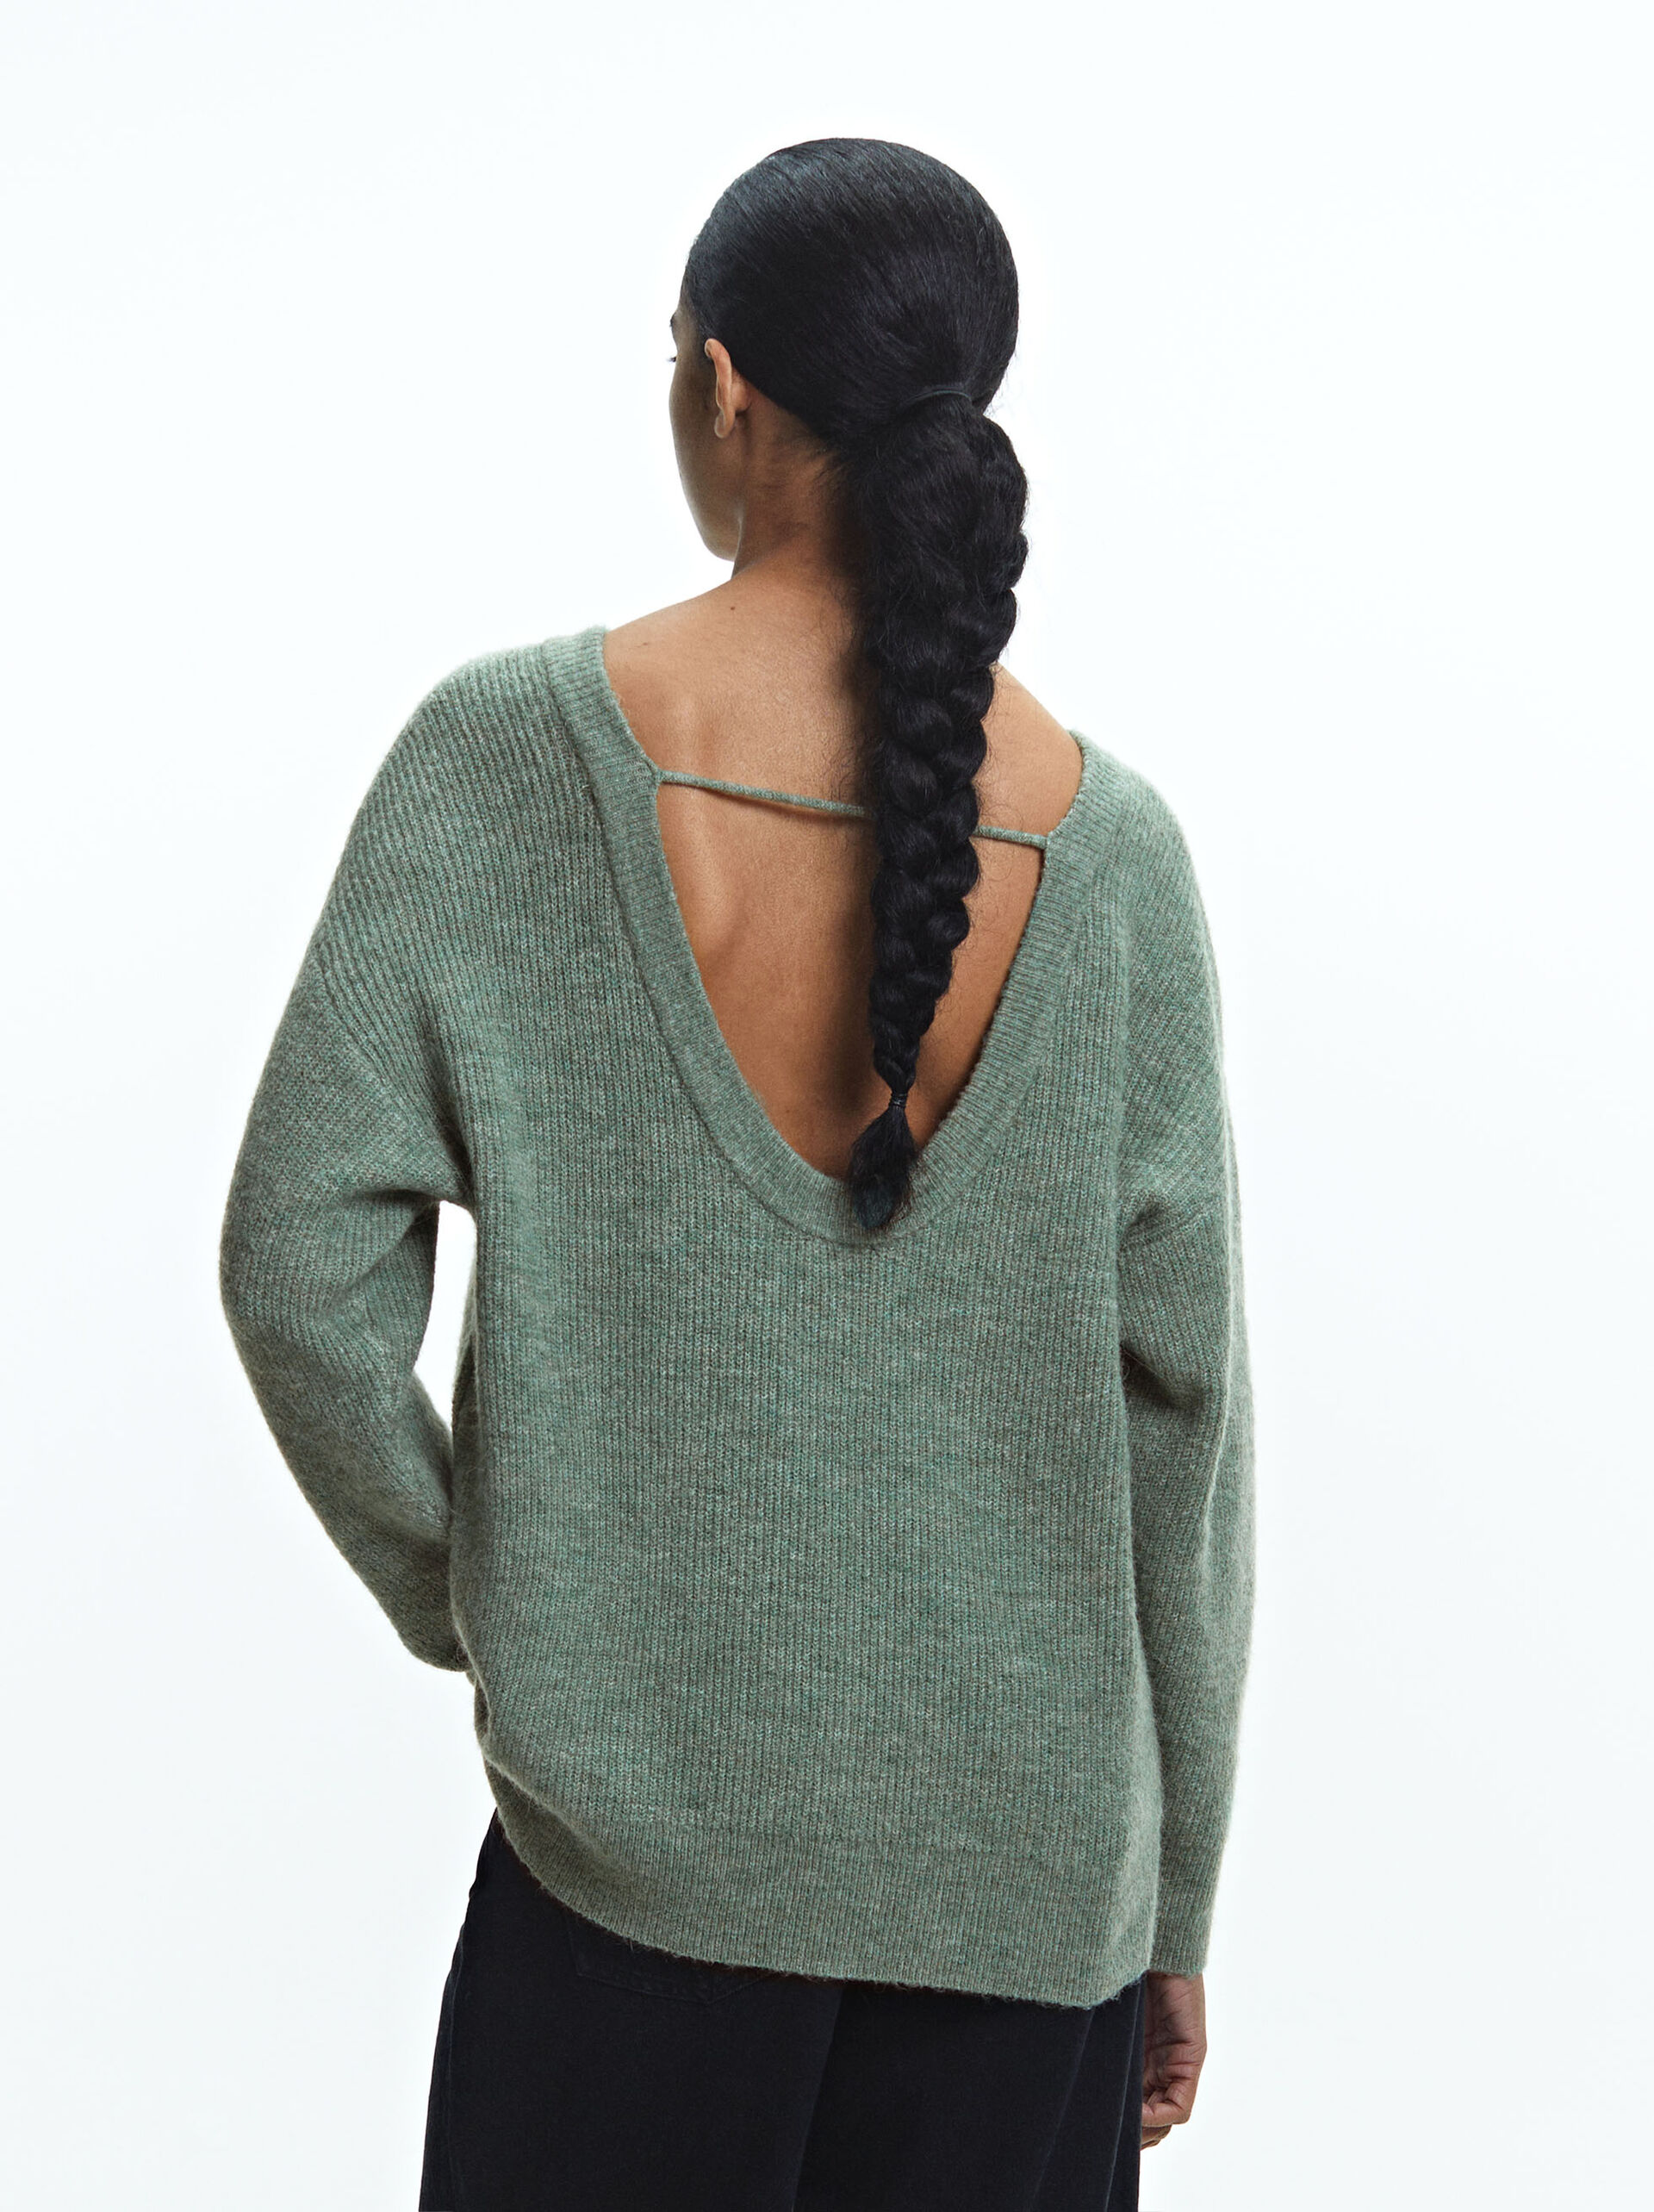 Knit Sweater image number 4.0